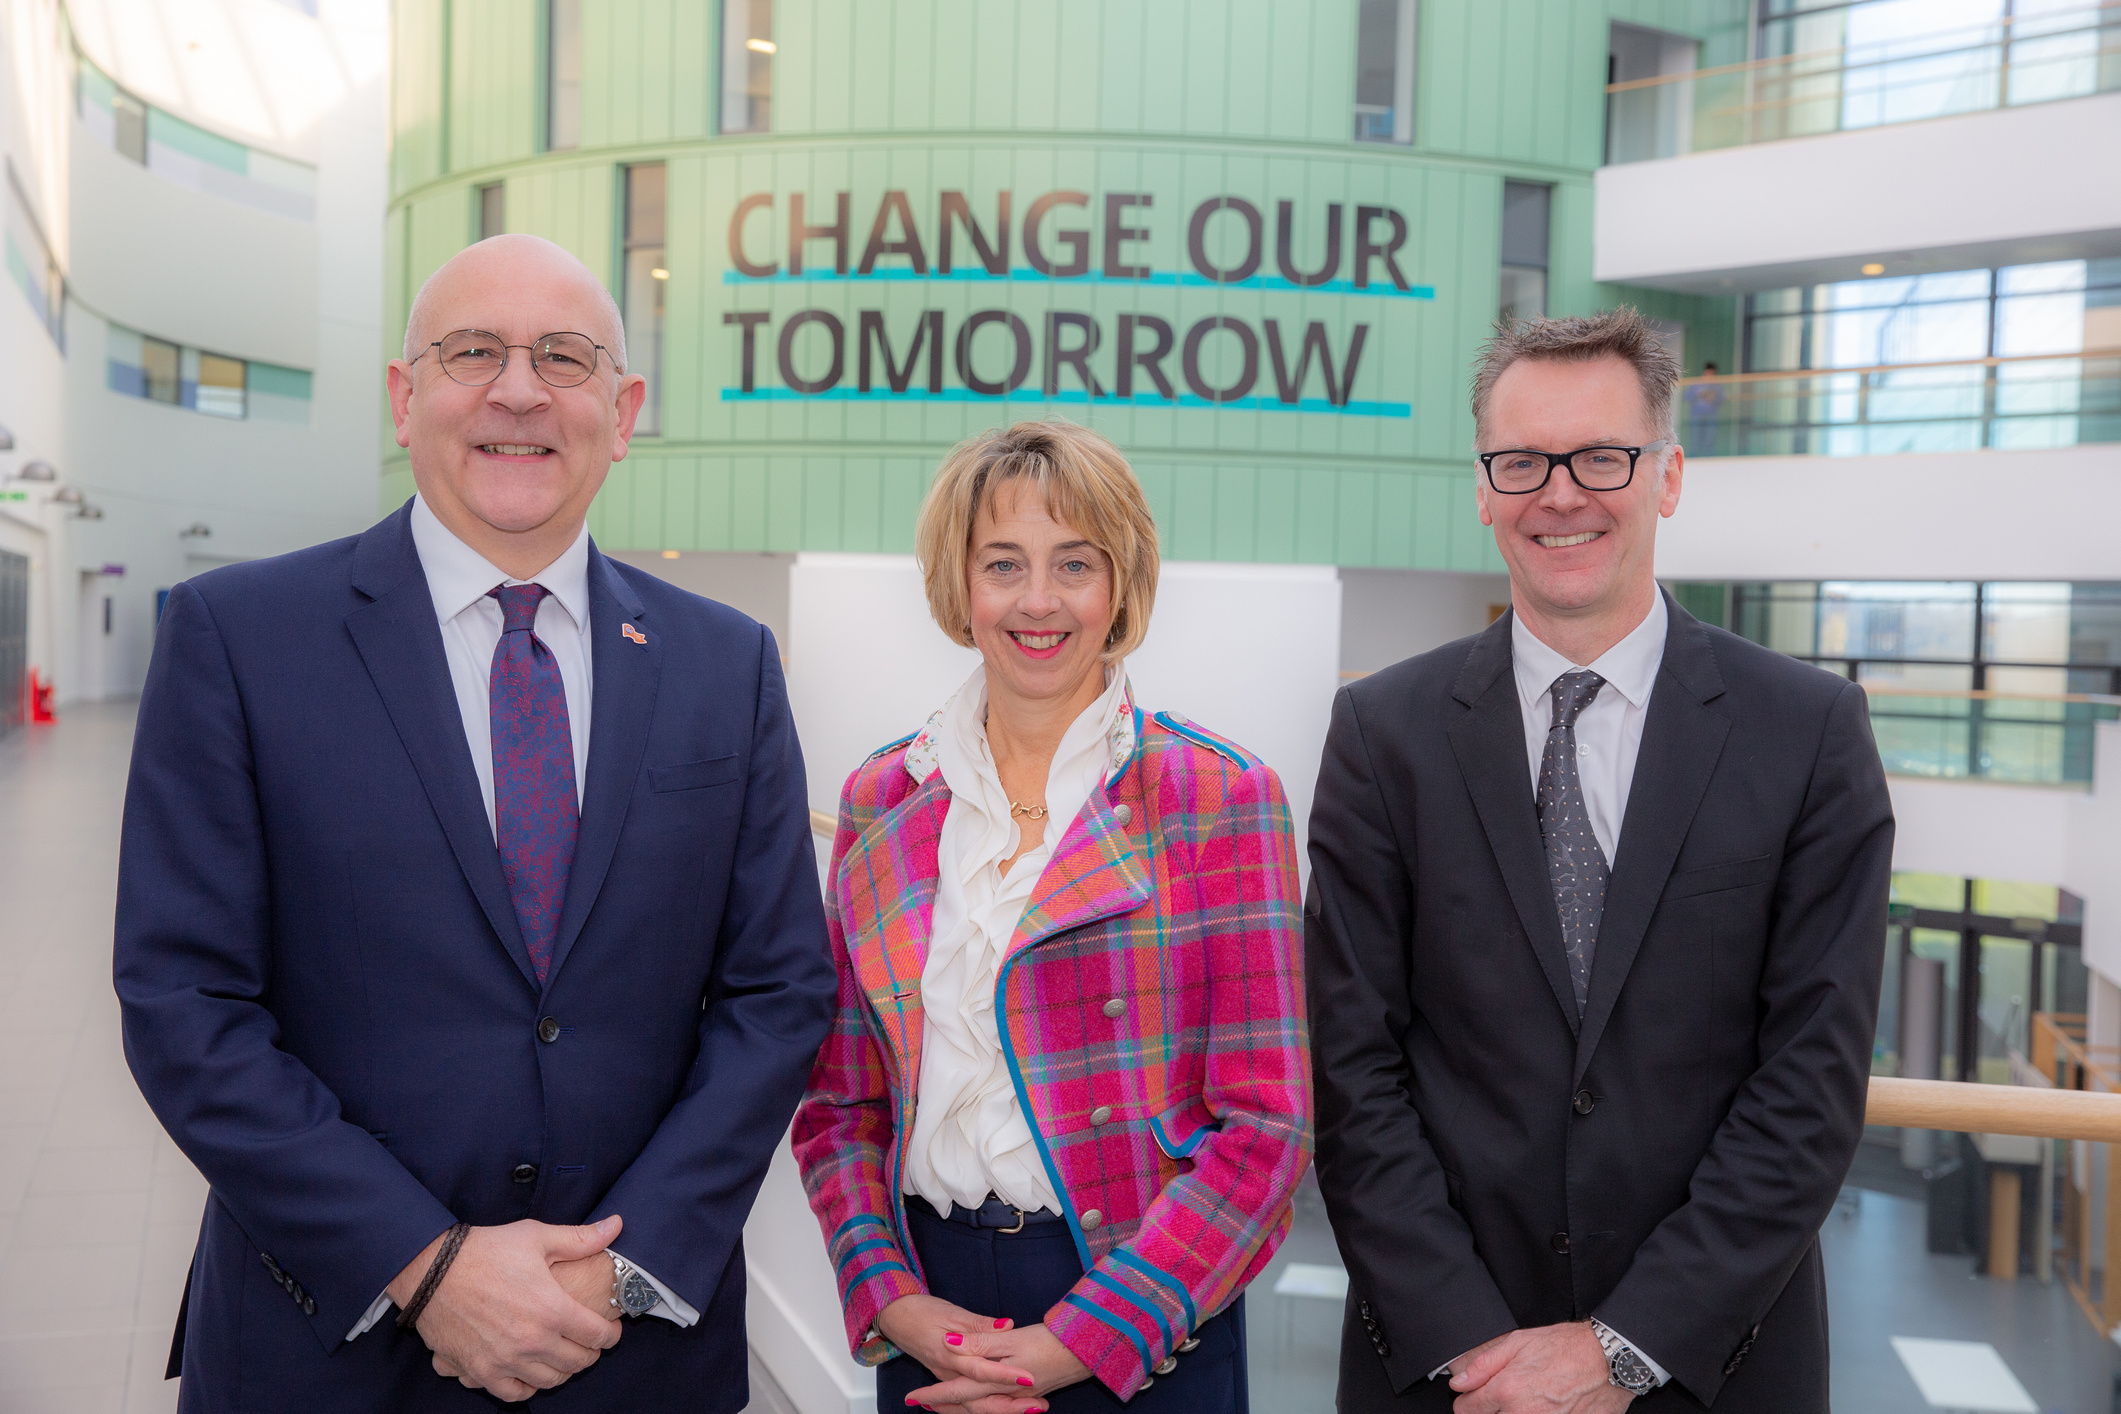 Stuart Broadley, CEO at Energy Industries Council , Elizabeth Gammie, Head of Aberdeen Business School at RGU and David Wilson,  Director of Oil, Gas & Energy at Opportunity North East Limited